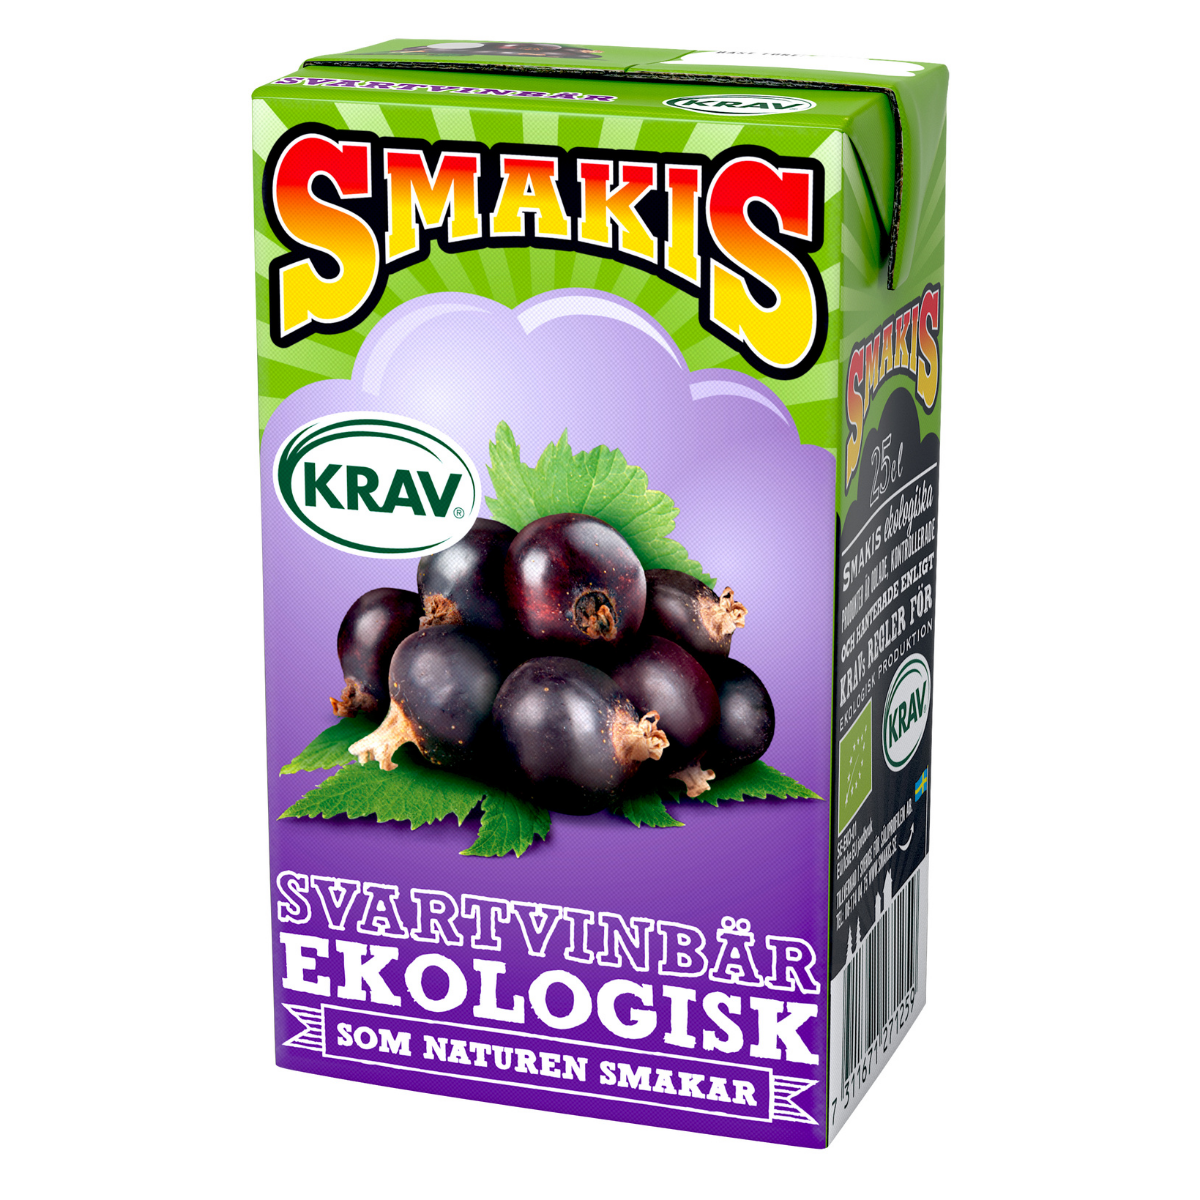 Smakis's Blackcurrant drink '